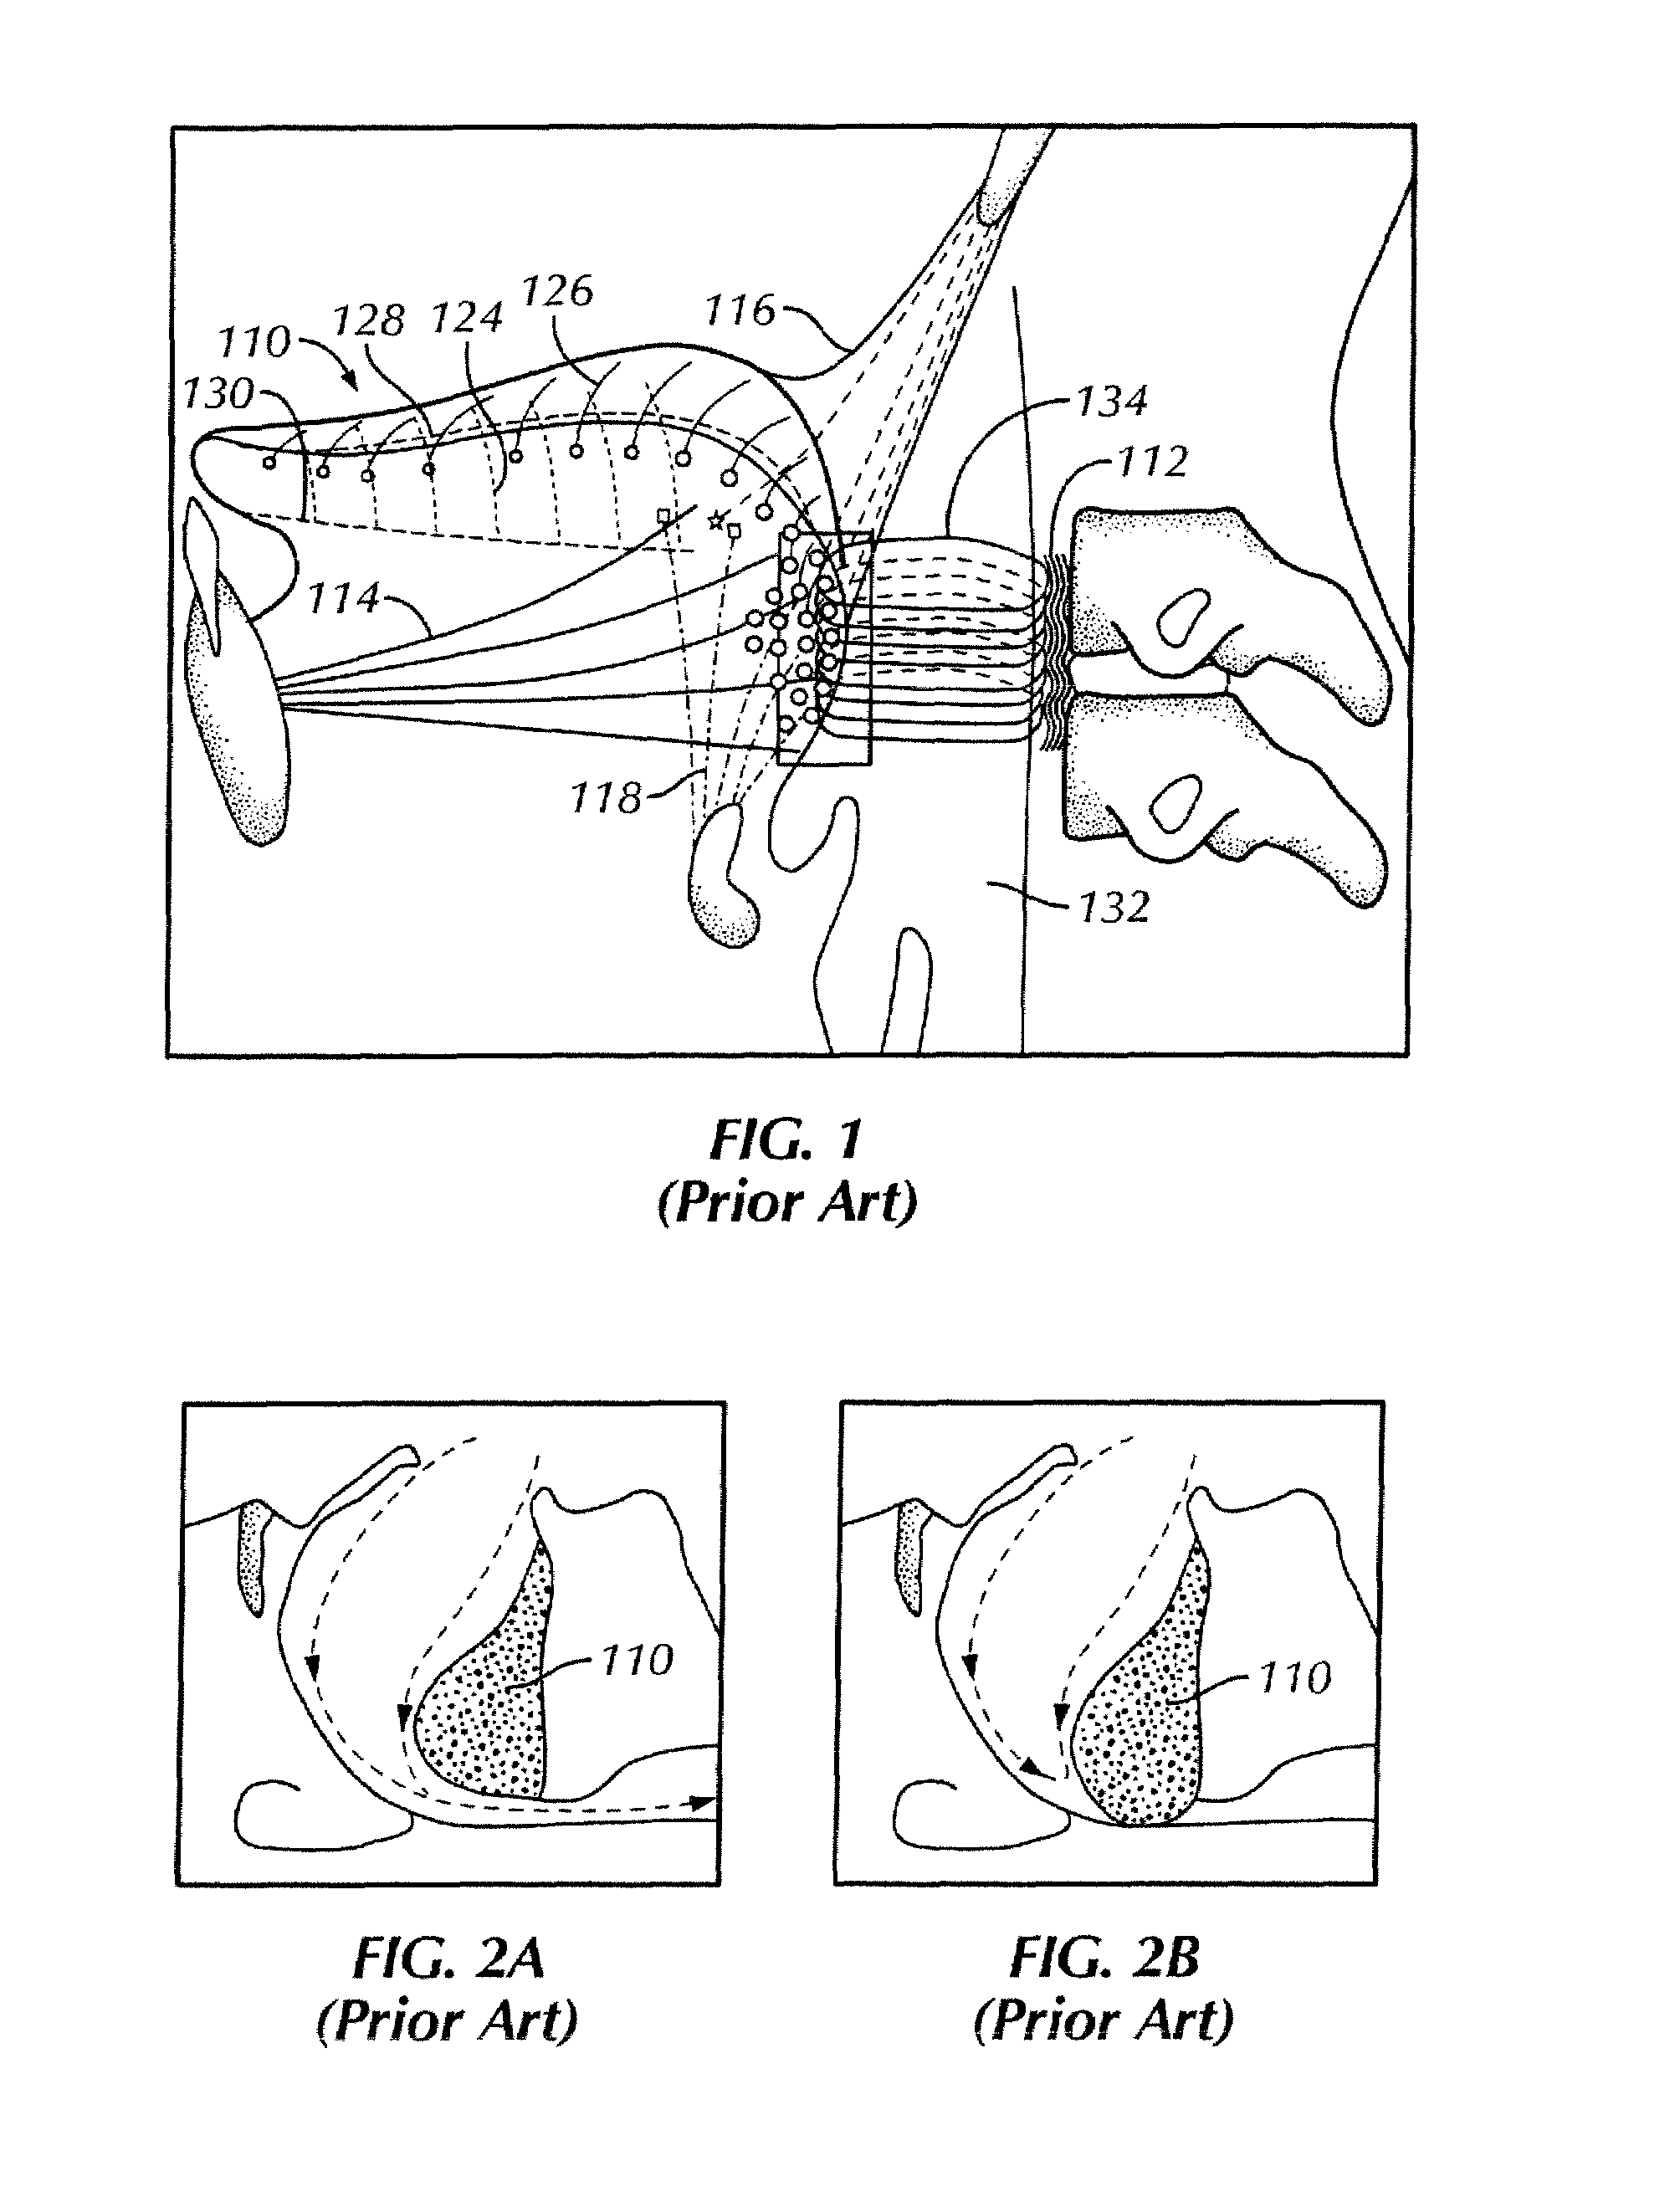 Method of Stimulating a Hypoglossal Nerve for Controlling the Position of a Patient's Tongue